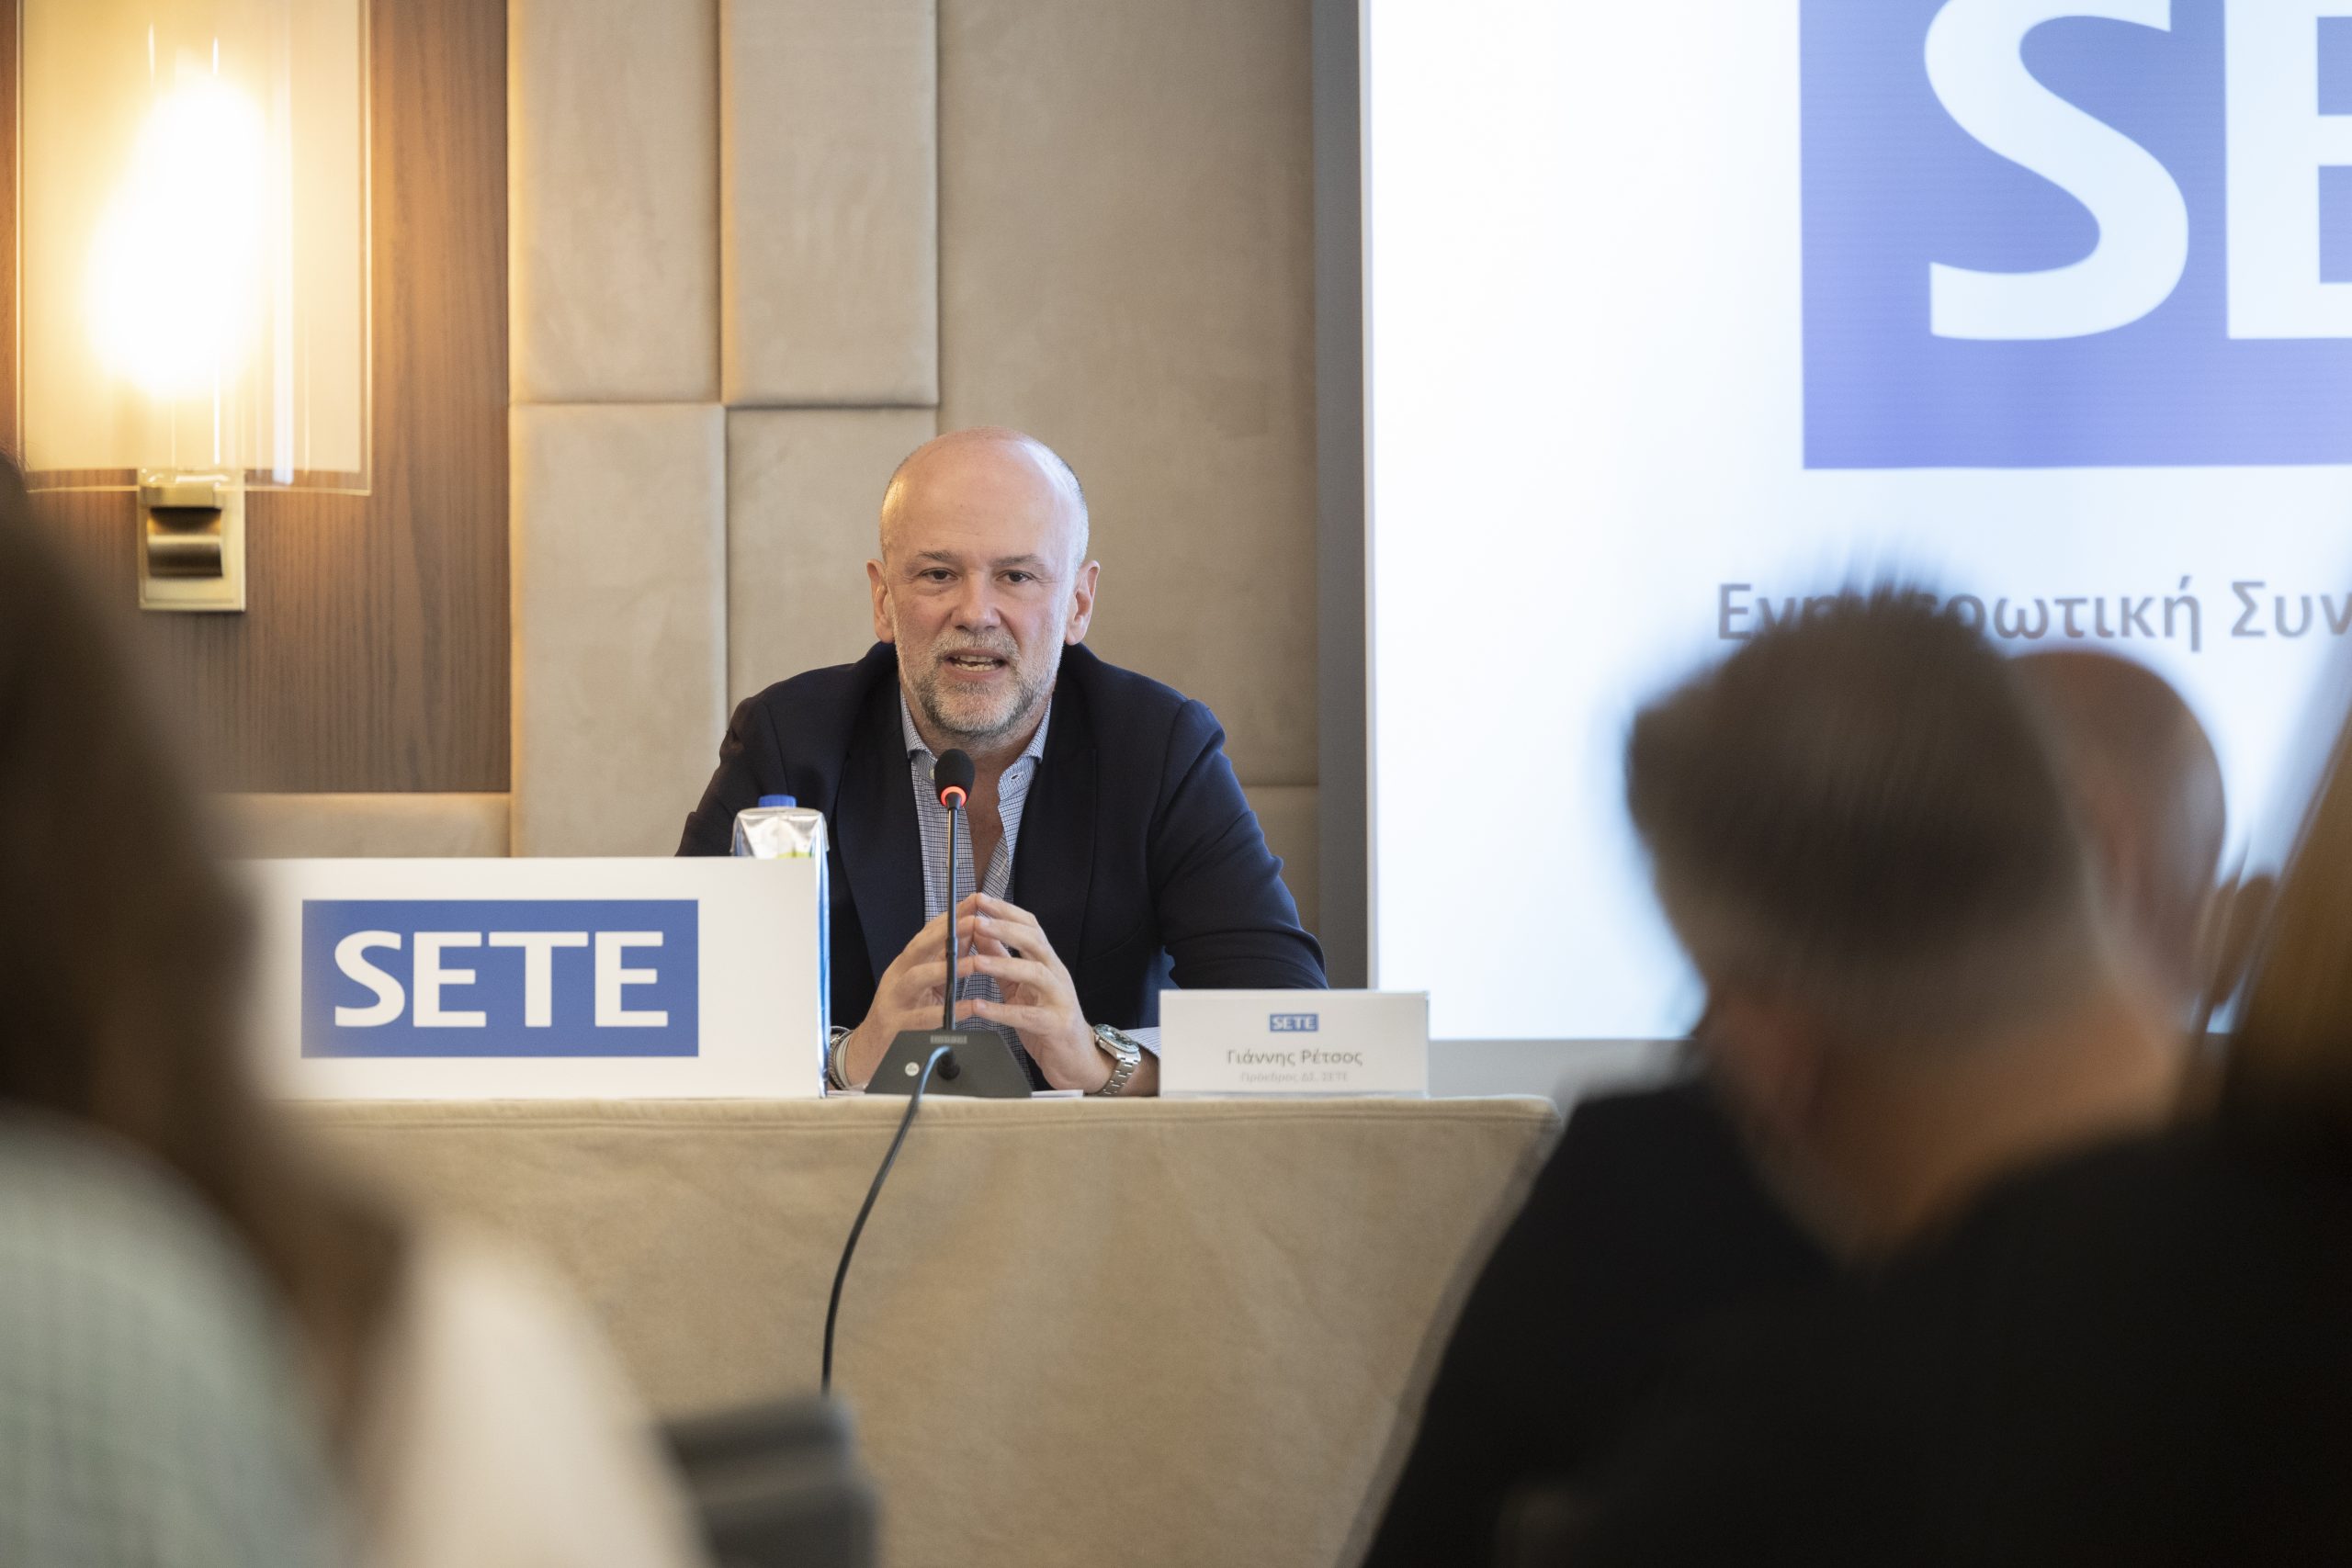 SETE president: Tourism sector to add another 50K jobs spots in Greece this year